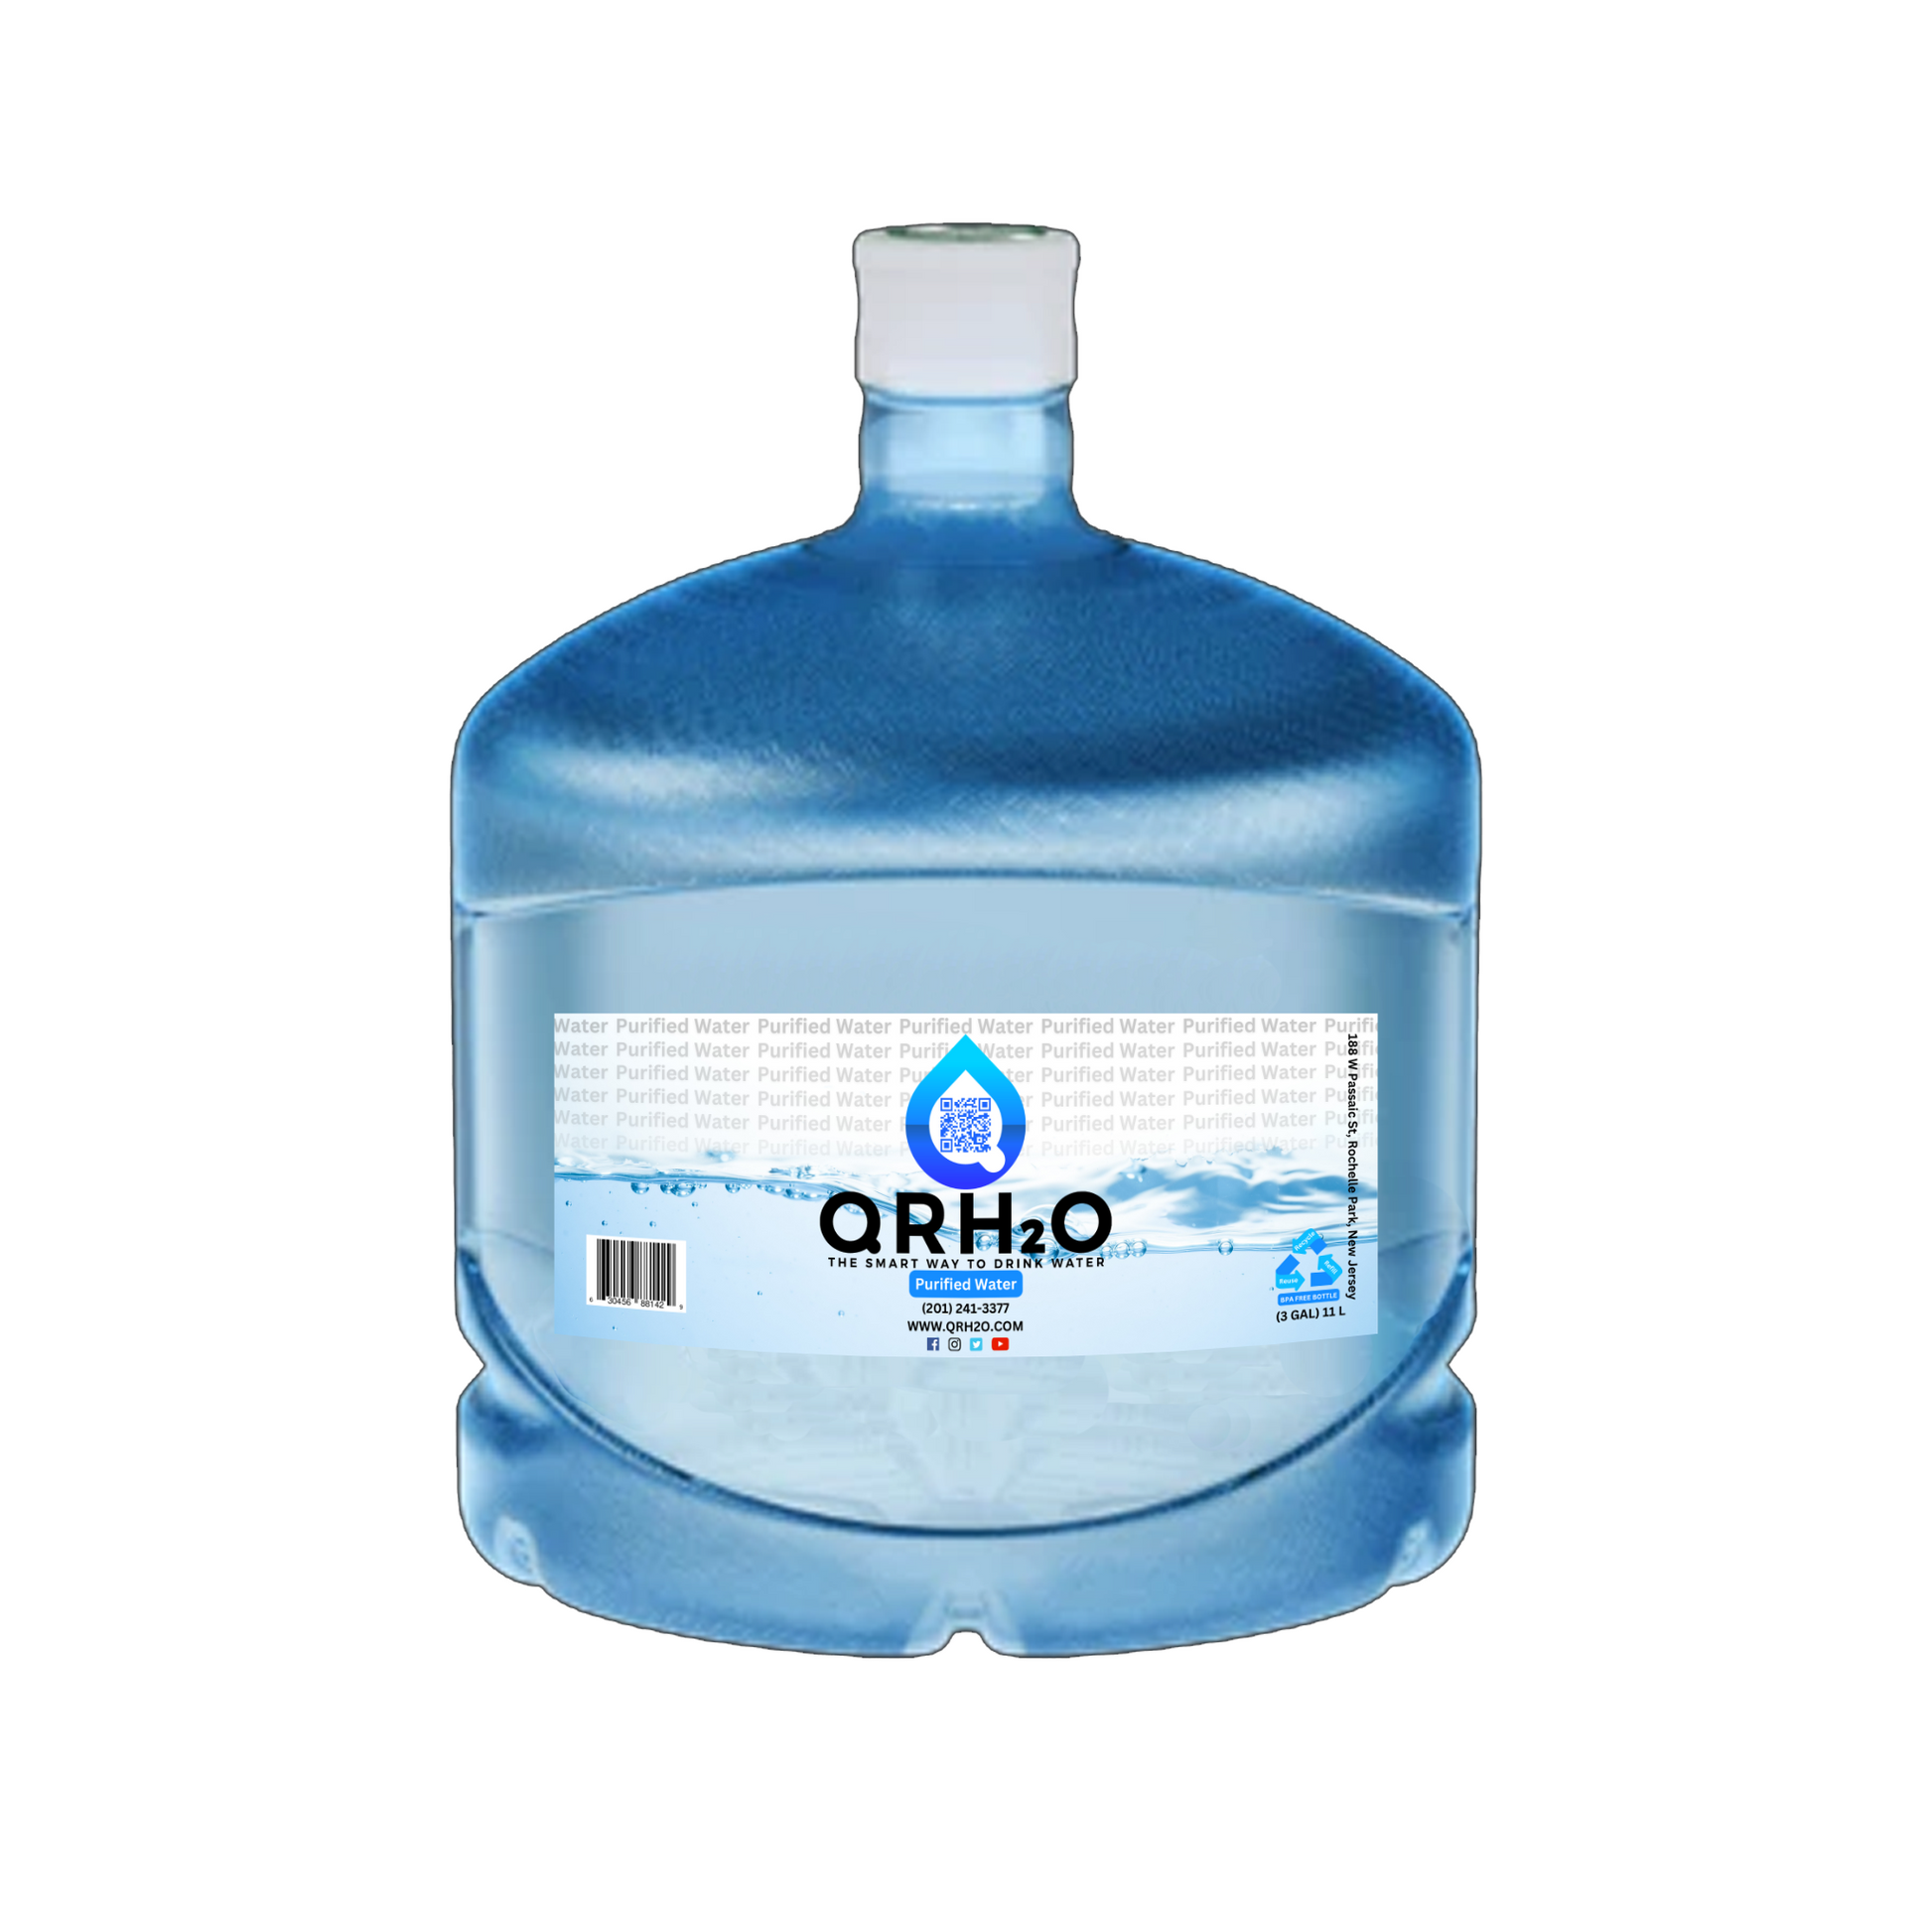 Get fresh, clean, and pure drinking water with our 3-Gallon 100% Purified Water, perfect for your home or office.